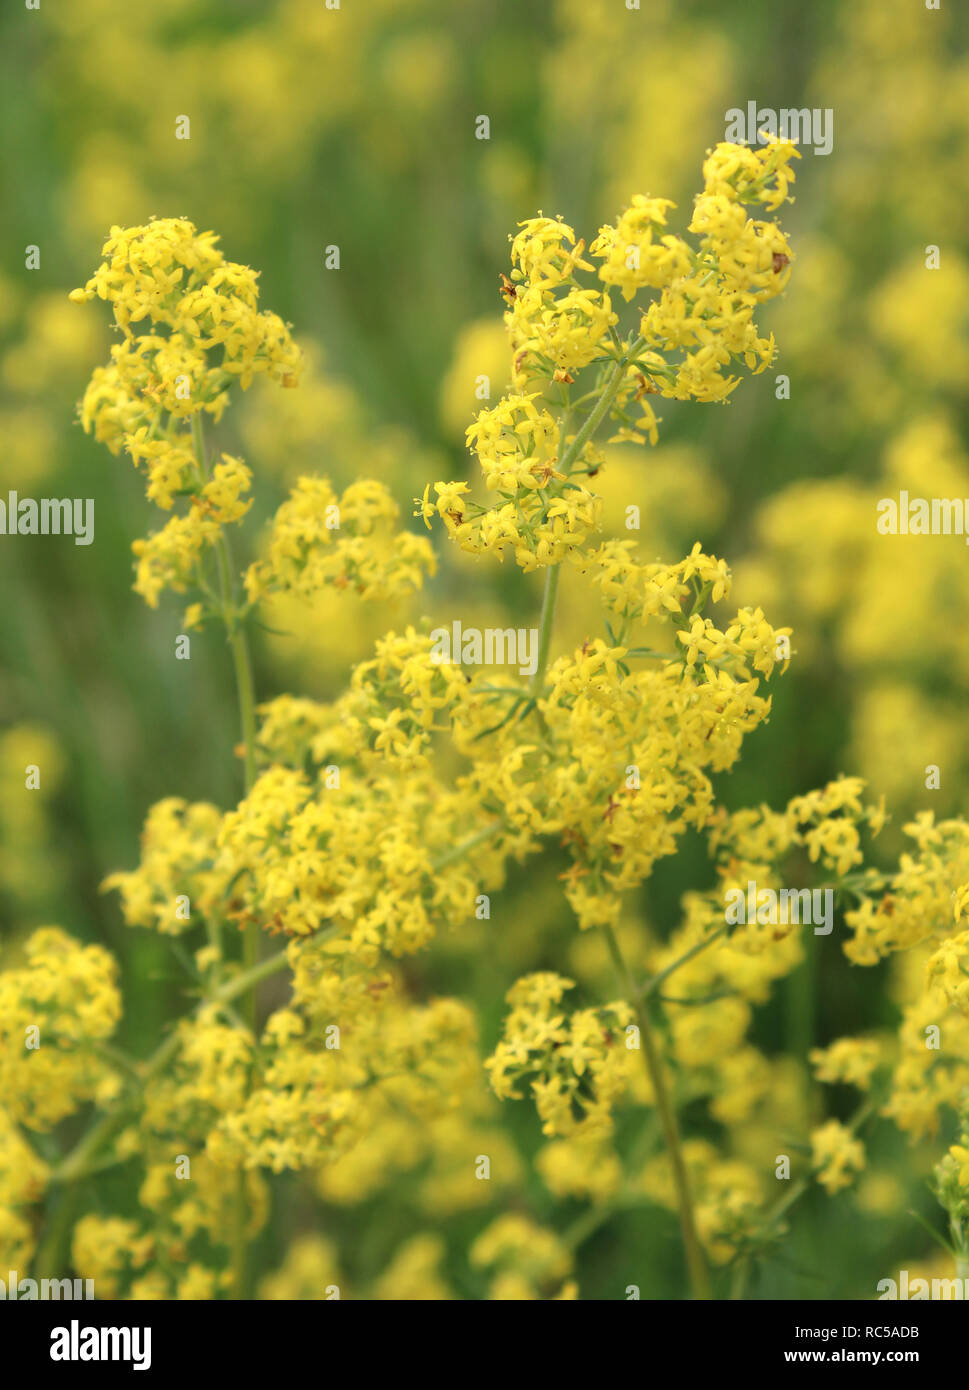 Lovely yellow background of Galium verum flowers , also known as Ladys bedstraw. Growing outdoors in a natural situation. Stock Photo